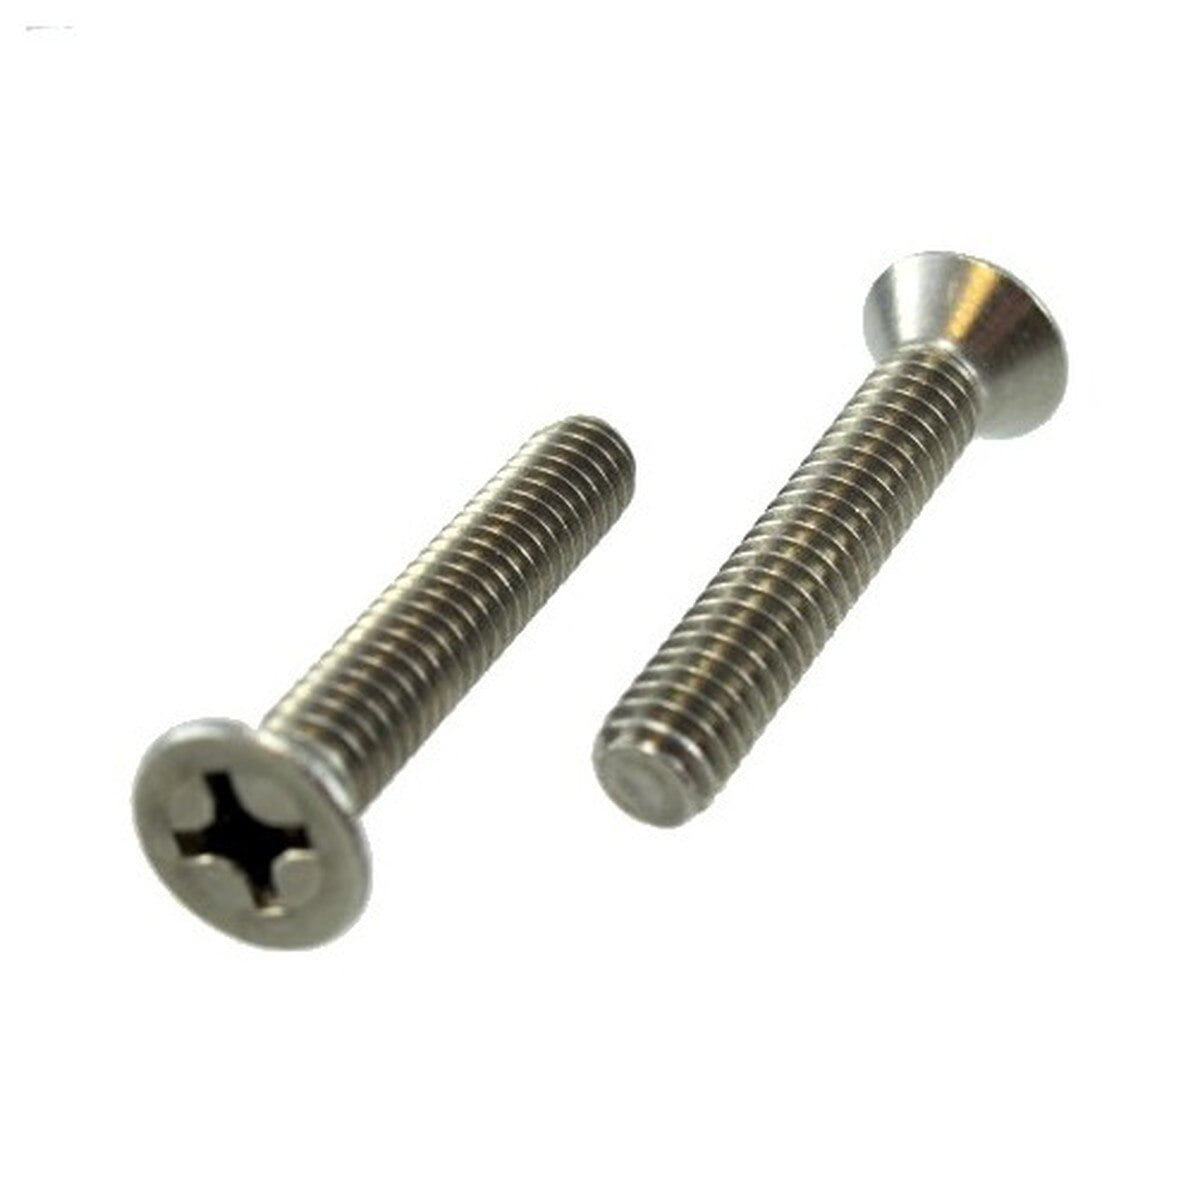 10 1/4"  5-40 Stainless Steel Machine Screws Oval Head Slotted Drive 